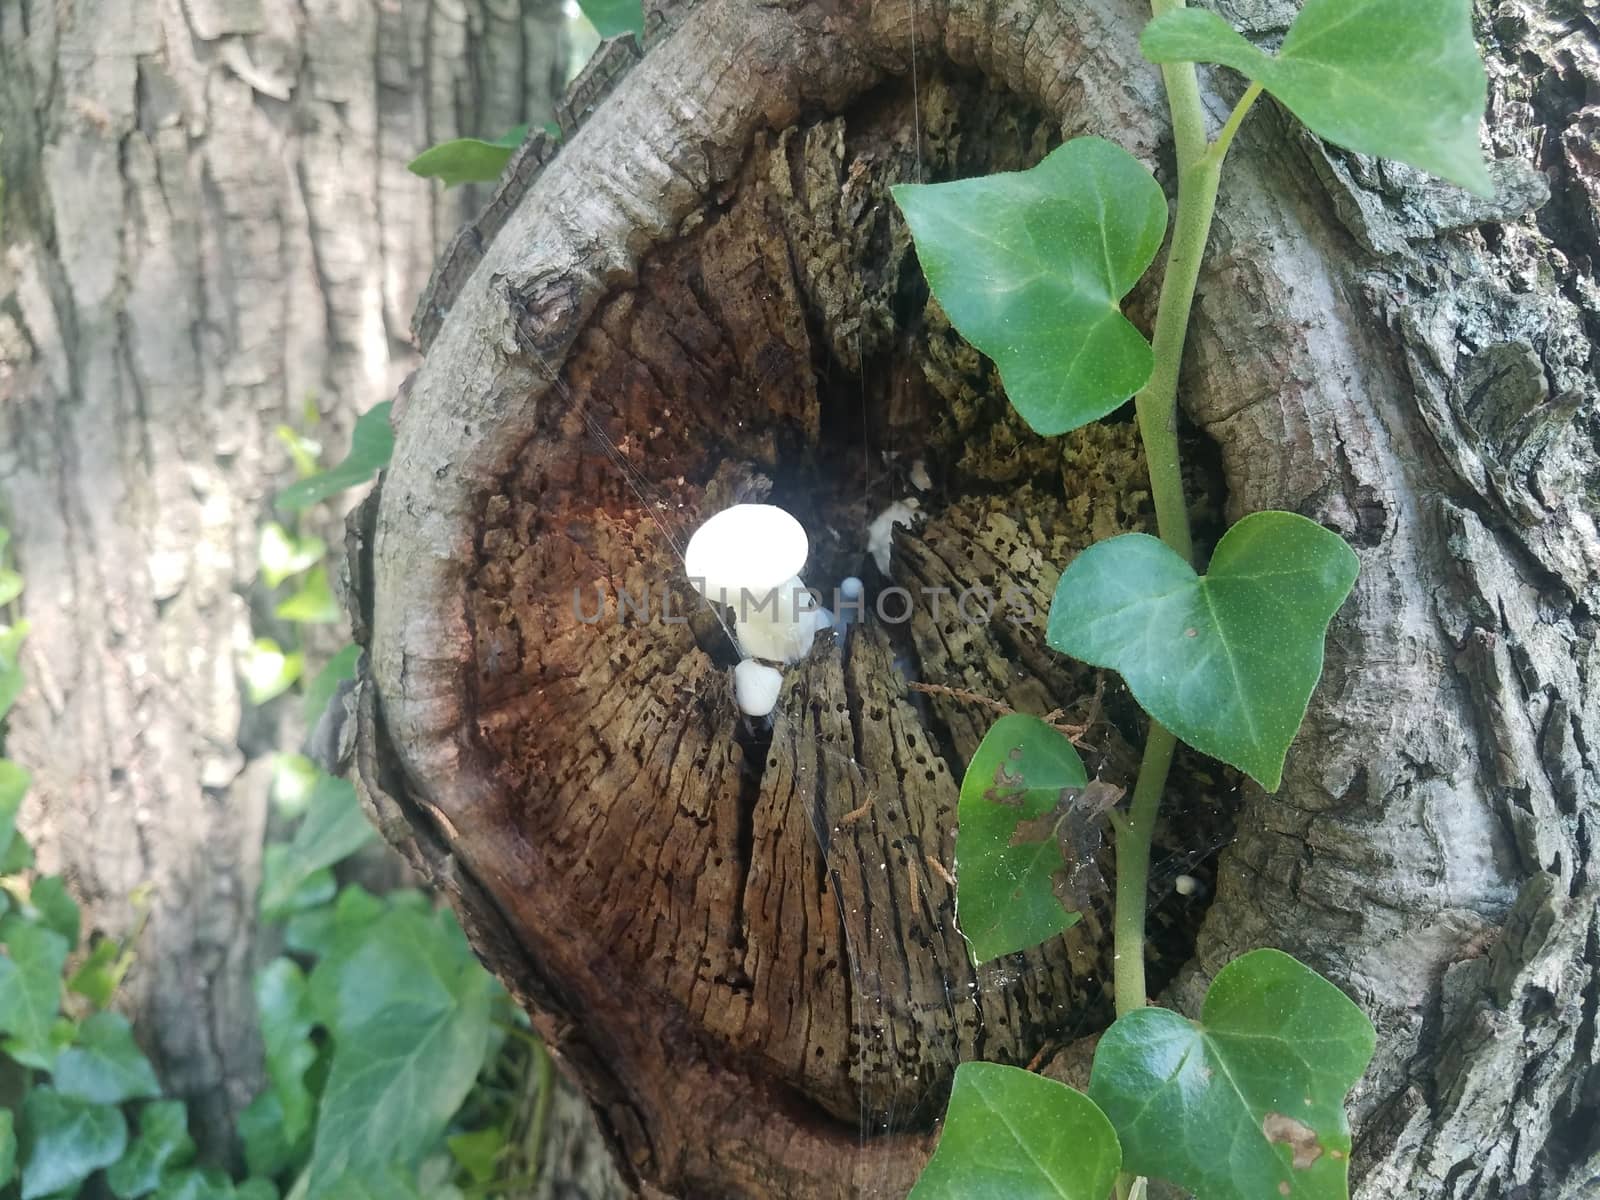 white mushroom or fungus in tree trunk with vine